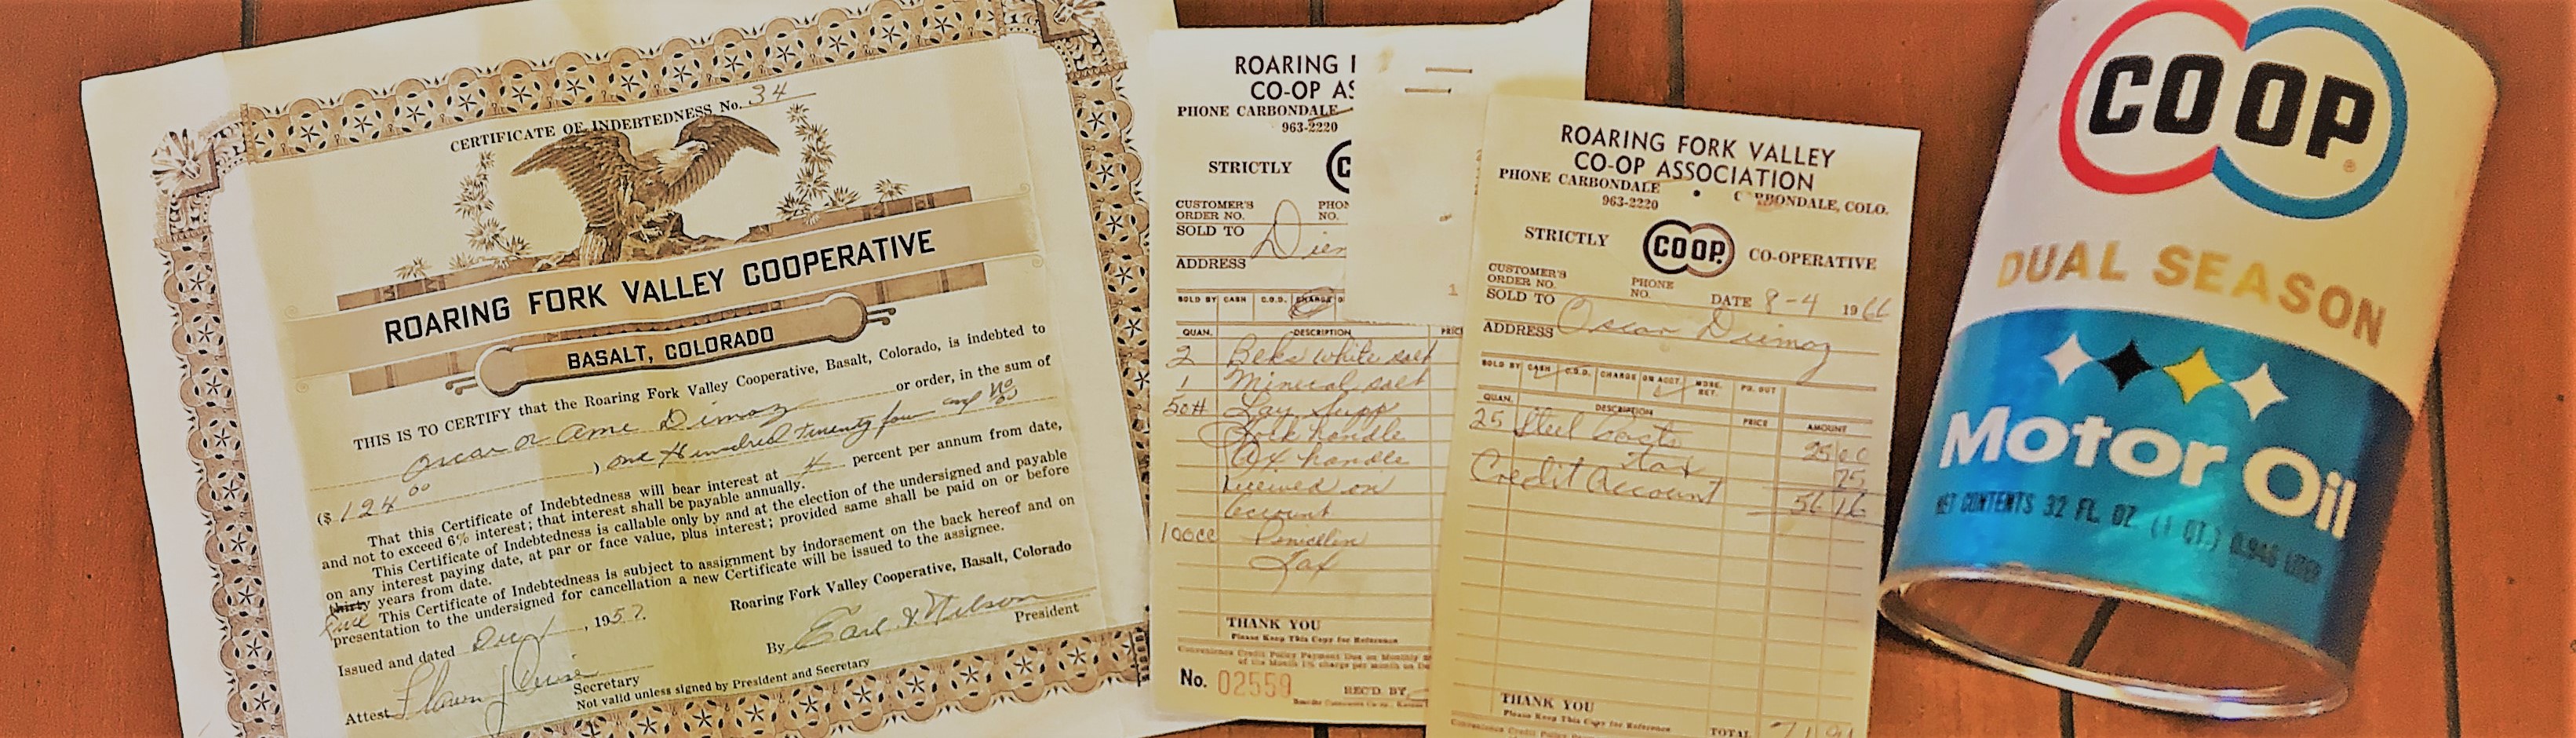 Co-op documents from the 1950s and 1960s and a can of Co-op motor oil